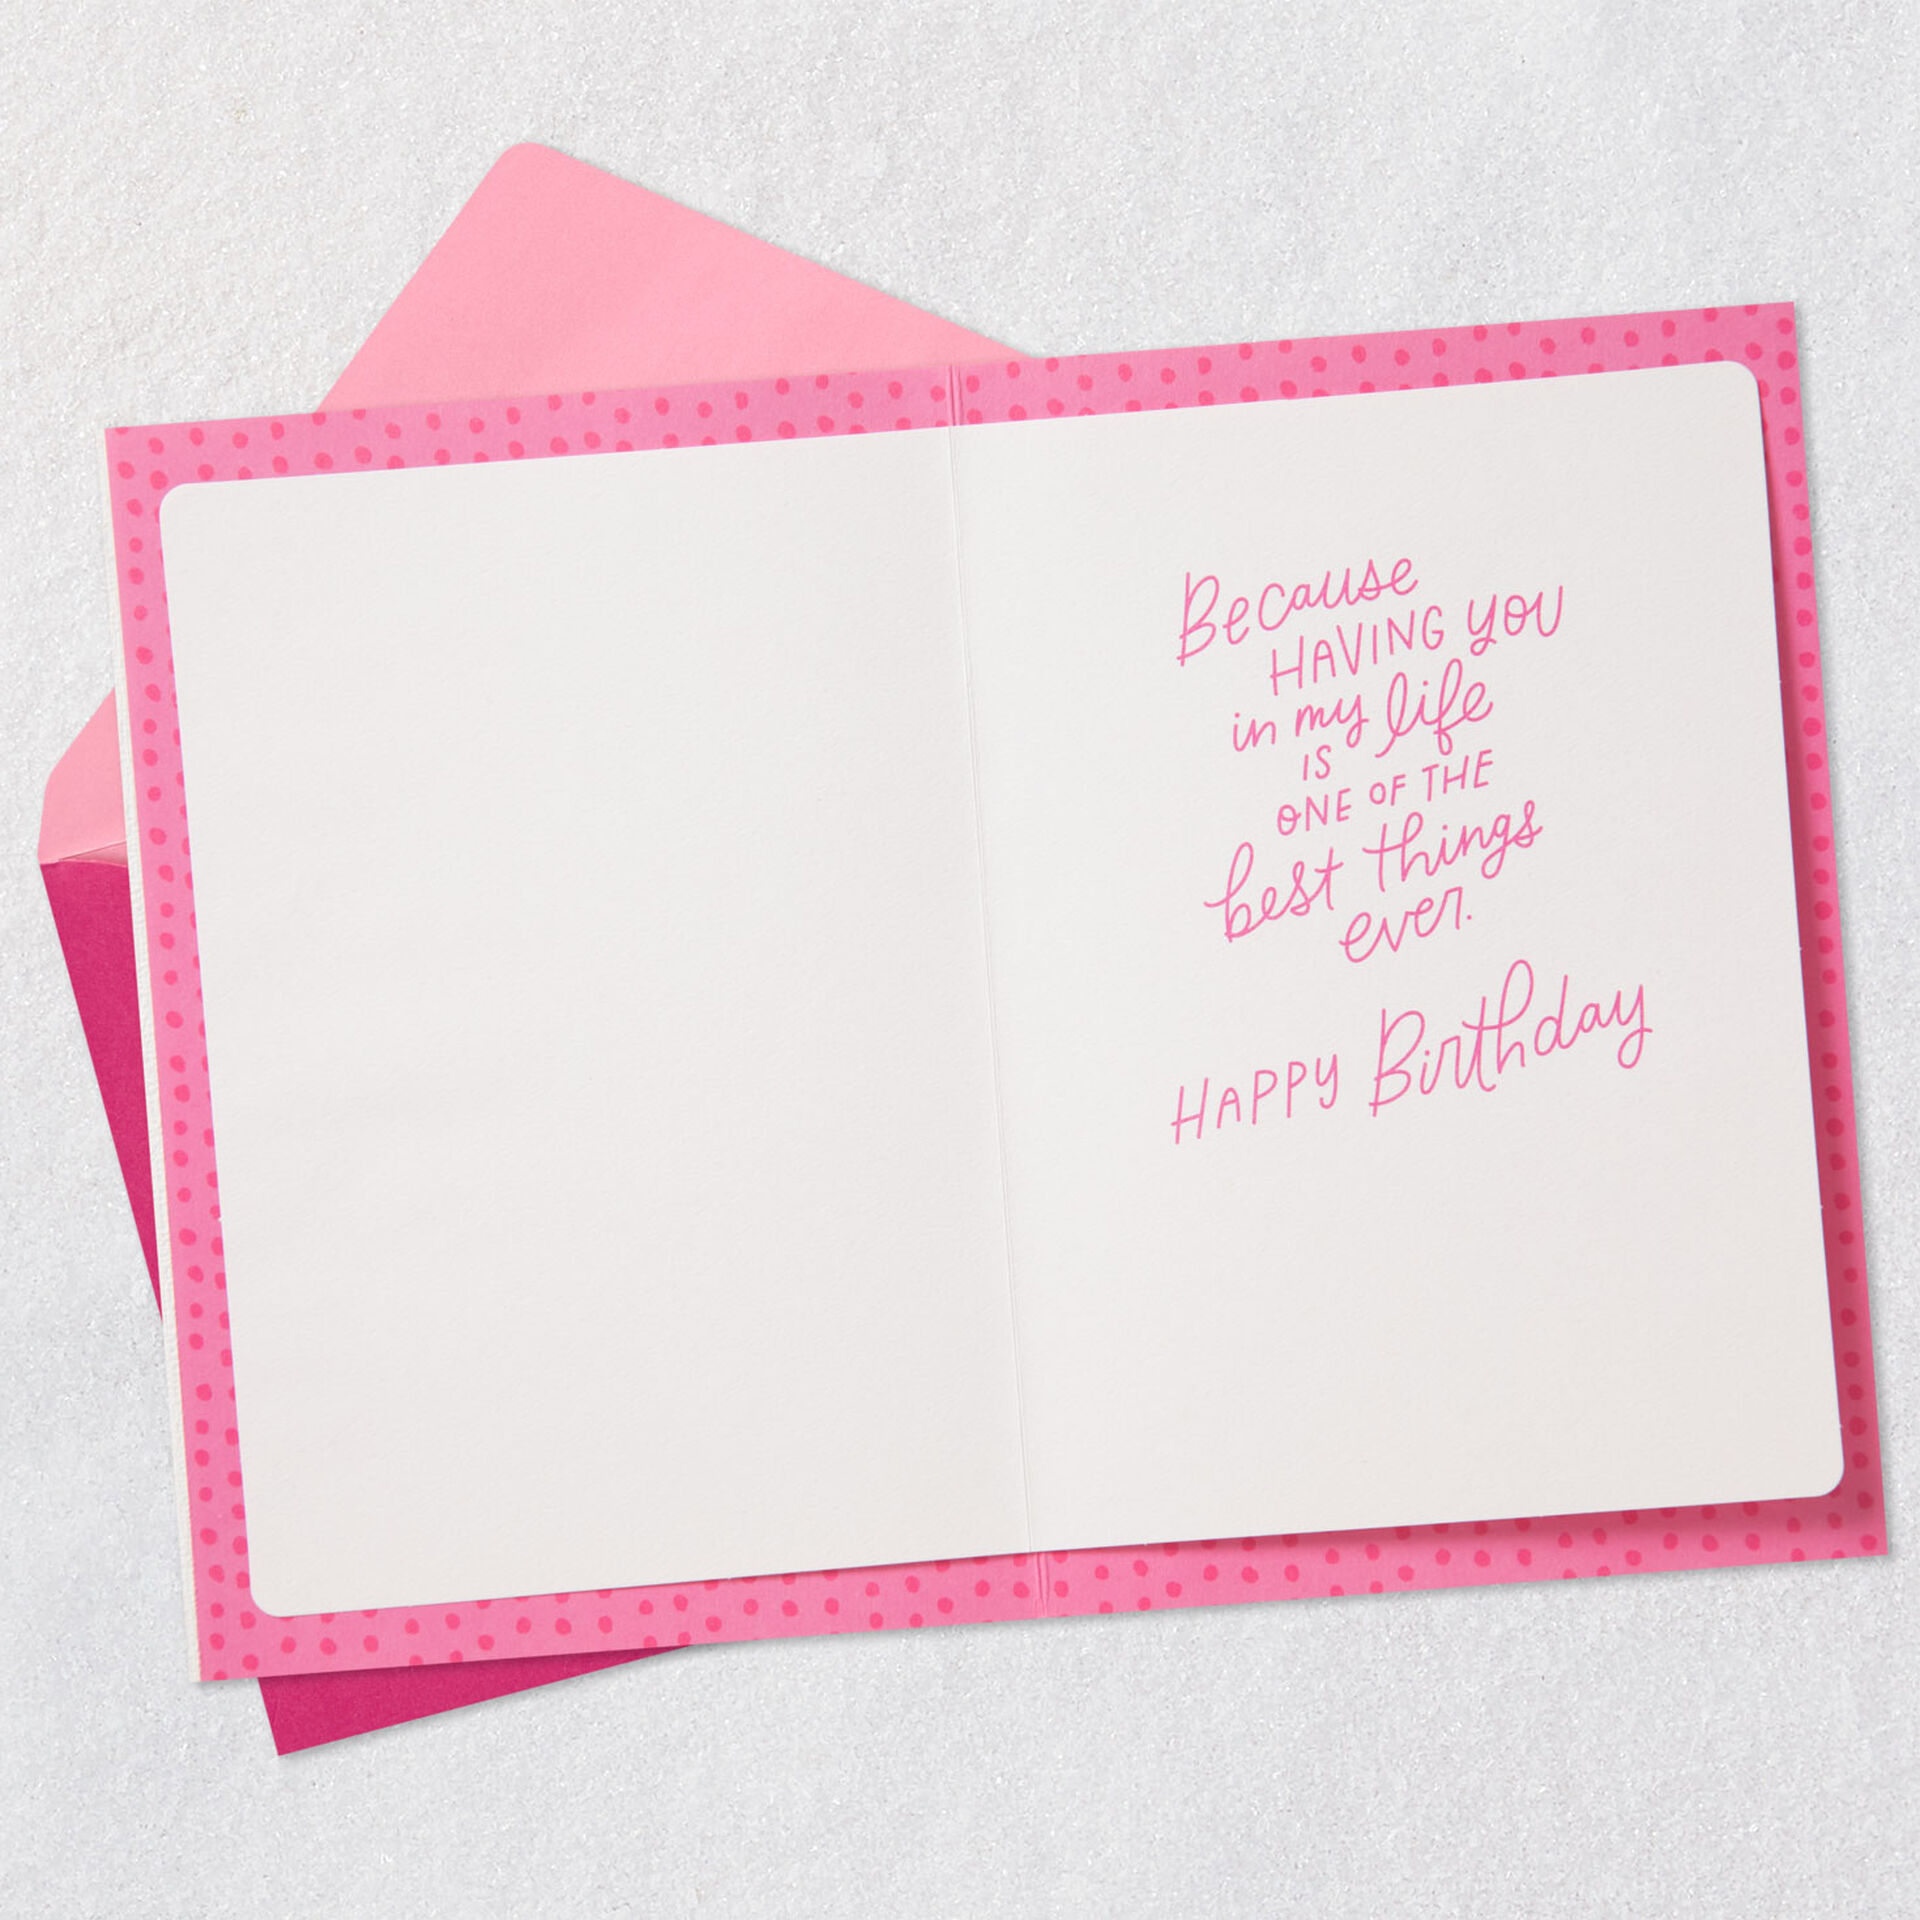 Balloons-Birthday-Card-for-Her_399FBD4561_03